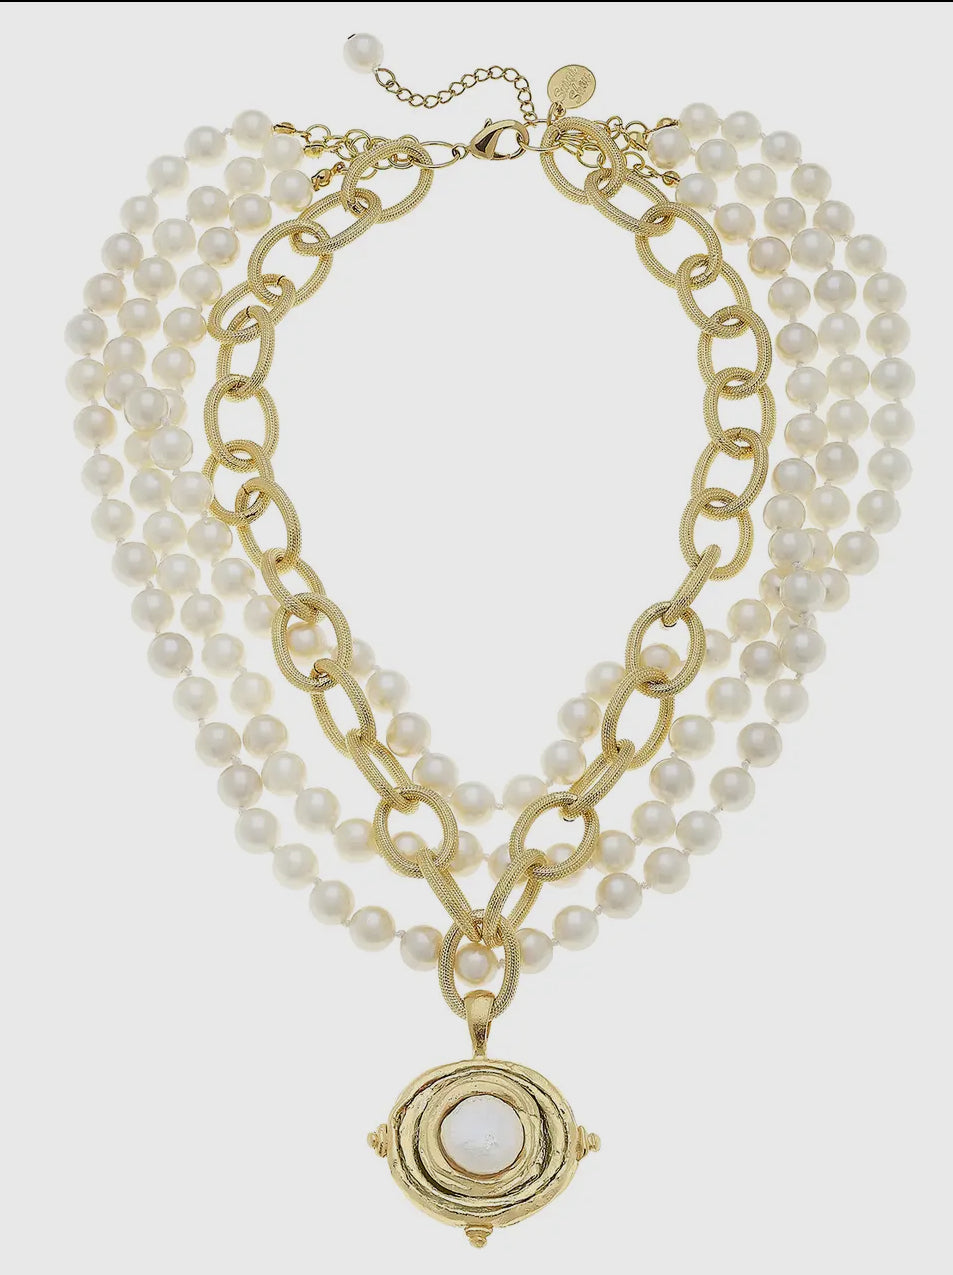 Gold Cab with Pearl Necklace - Susan Shaw